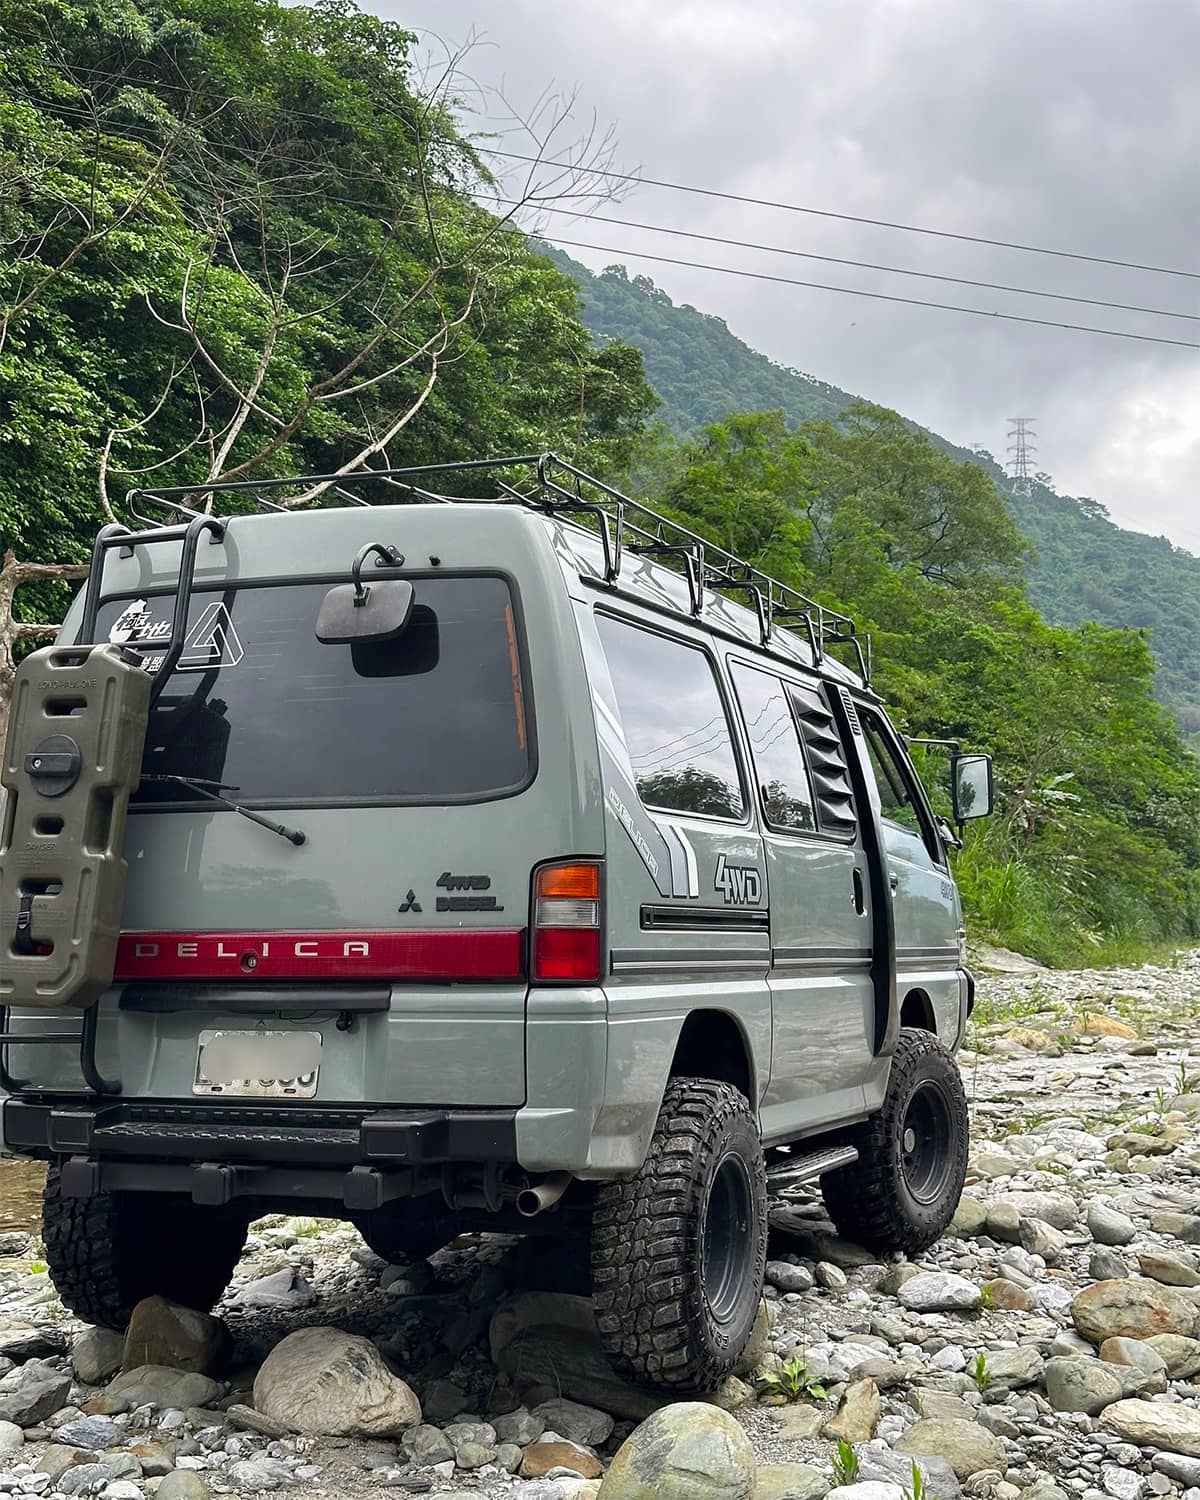 Grey 1996 Mitsubishi Delica L300 off-road build with a ladder and roof rack